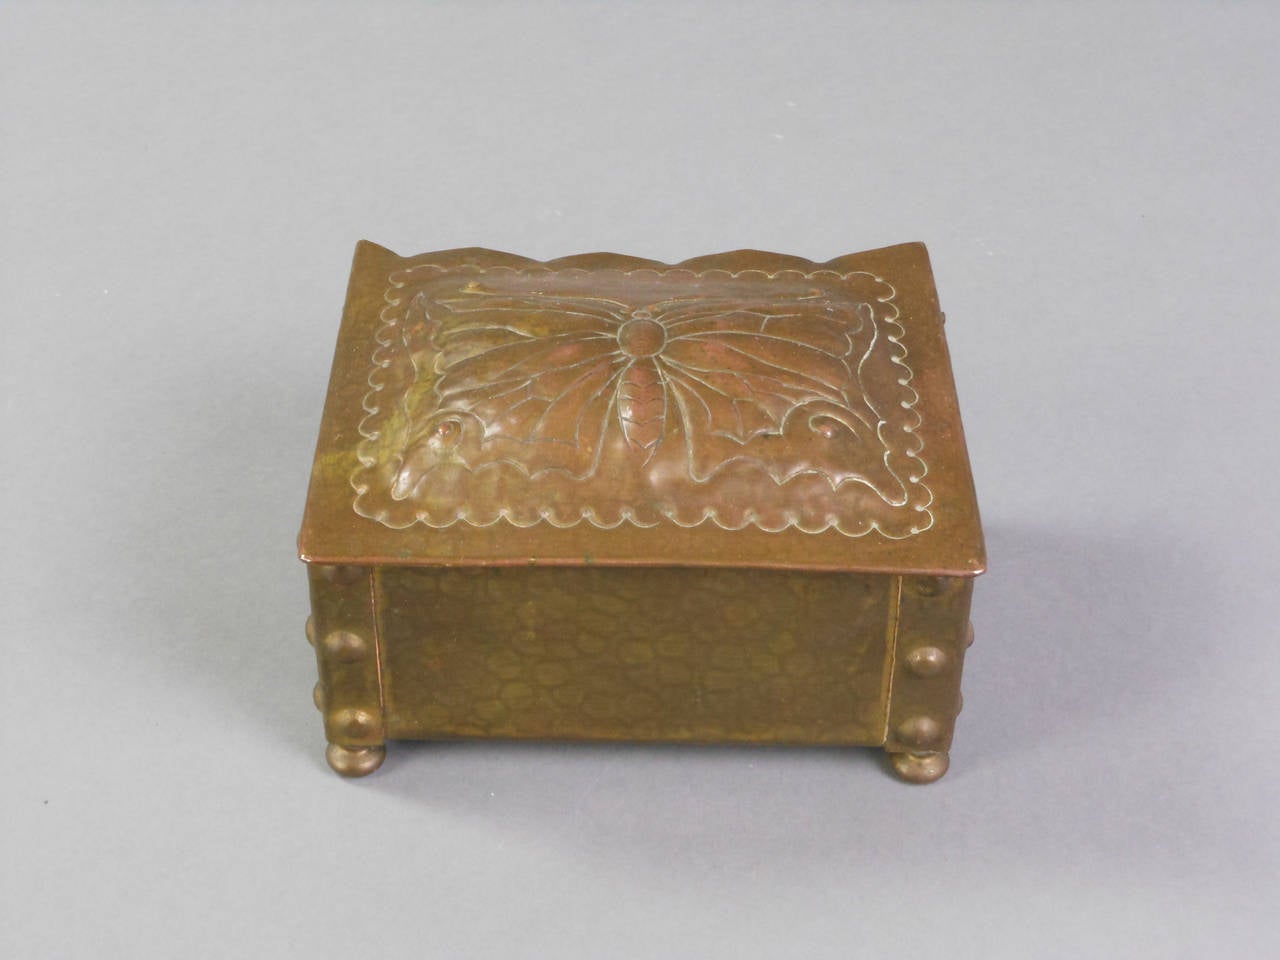 This patinated brass Swiss box has a hinged top with a wonderful butterfly in repousse. The hammered box is studded at the corners and has a wood-lined interior and stands on four bun feet. Stamped on the bottom: S. Canevascin Locarno.